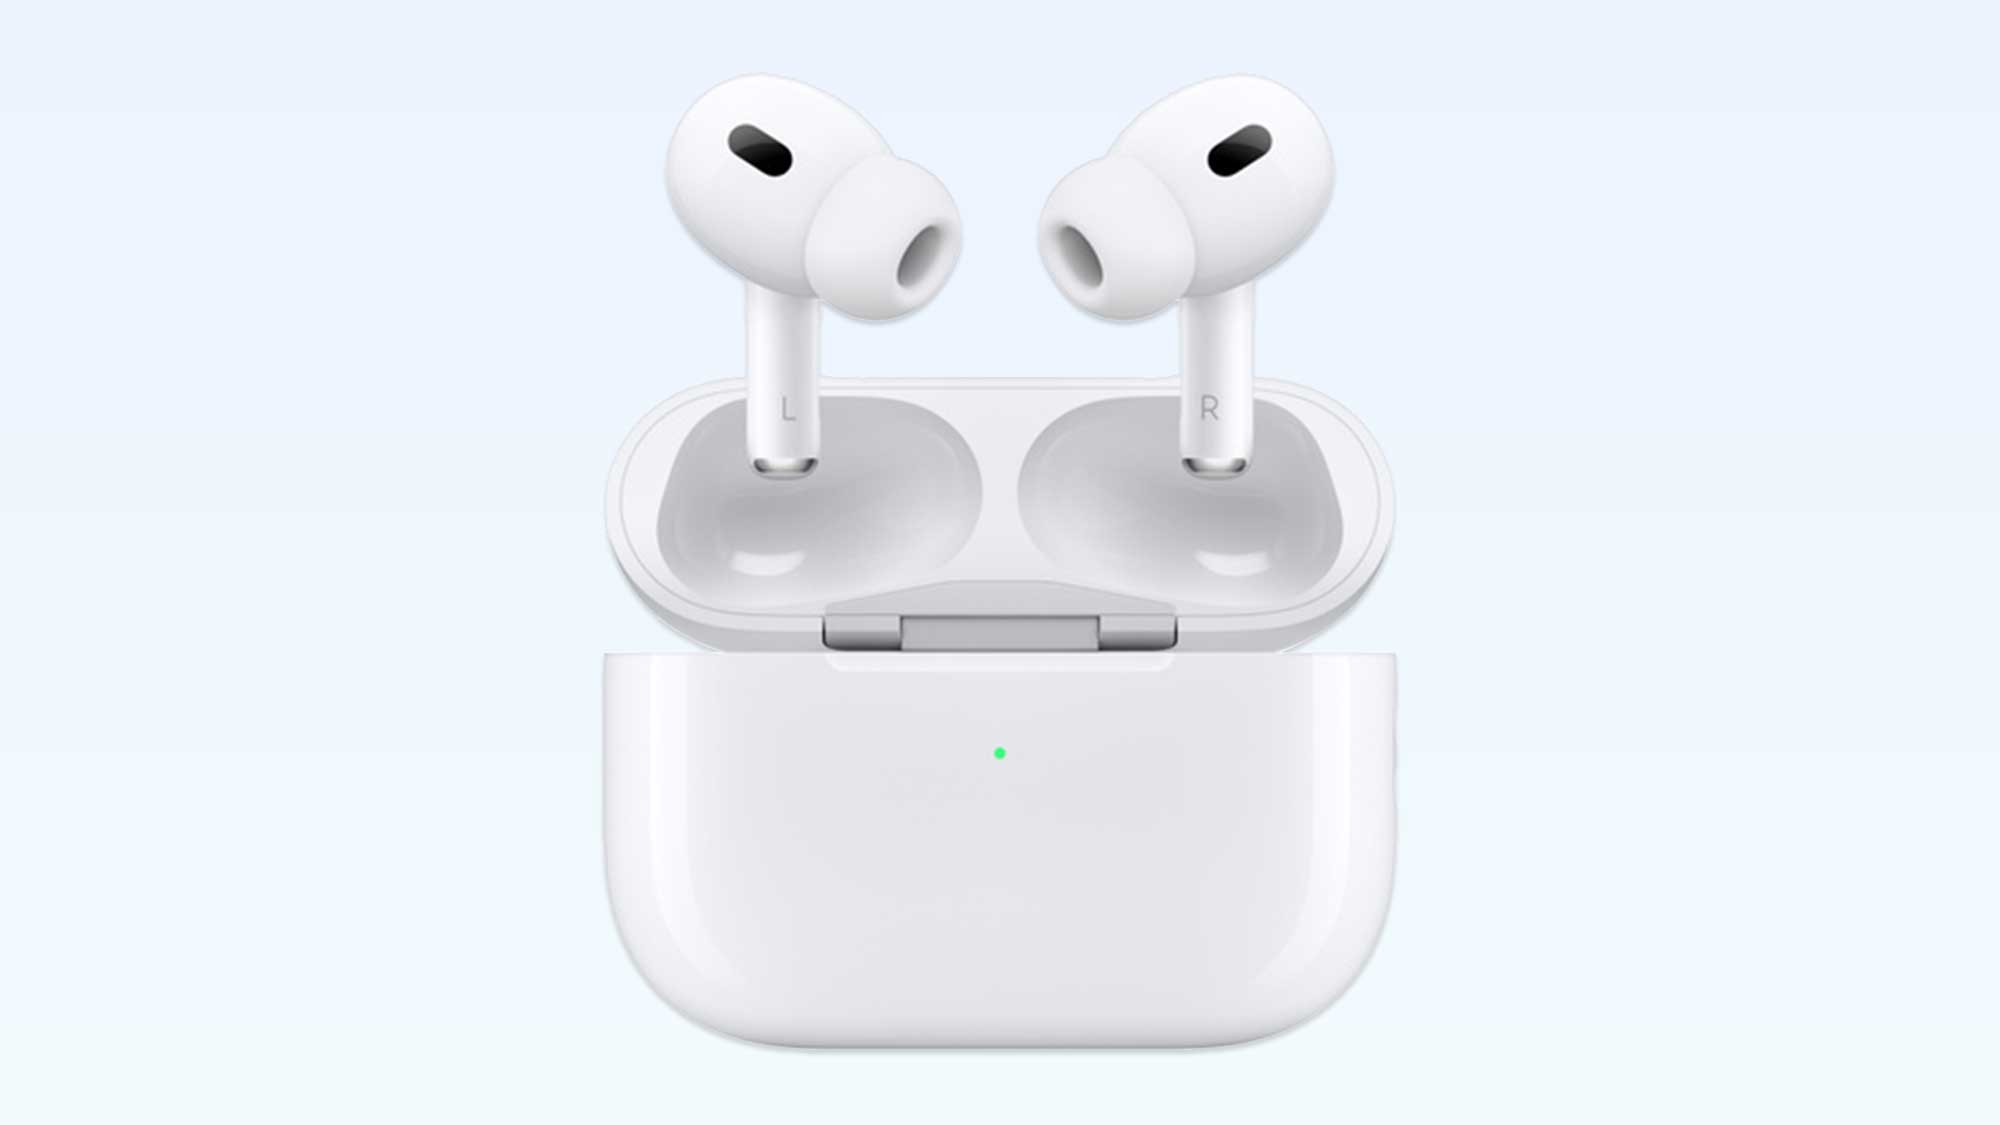 Apple AirPods Pro 2 on a light blue background